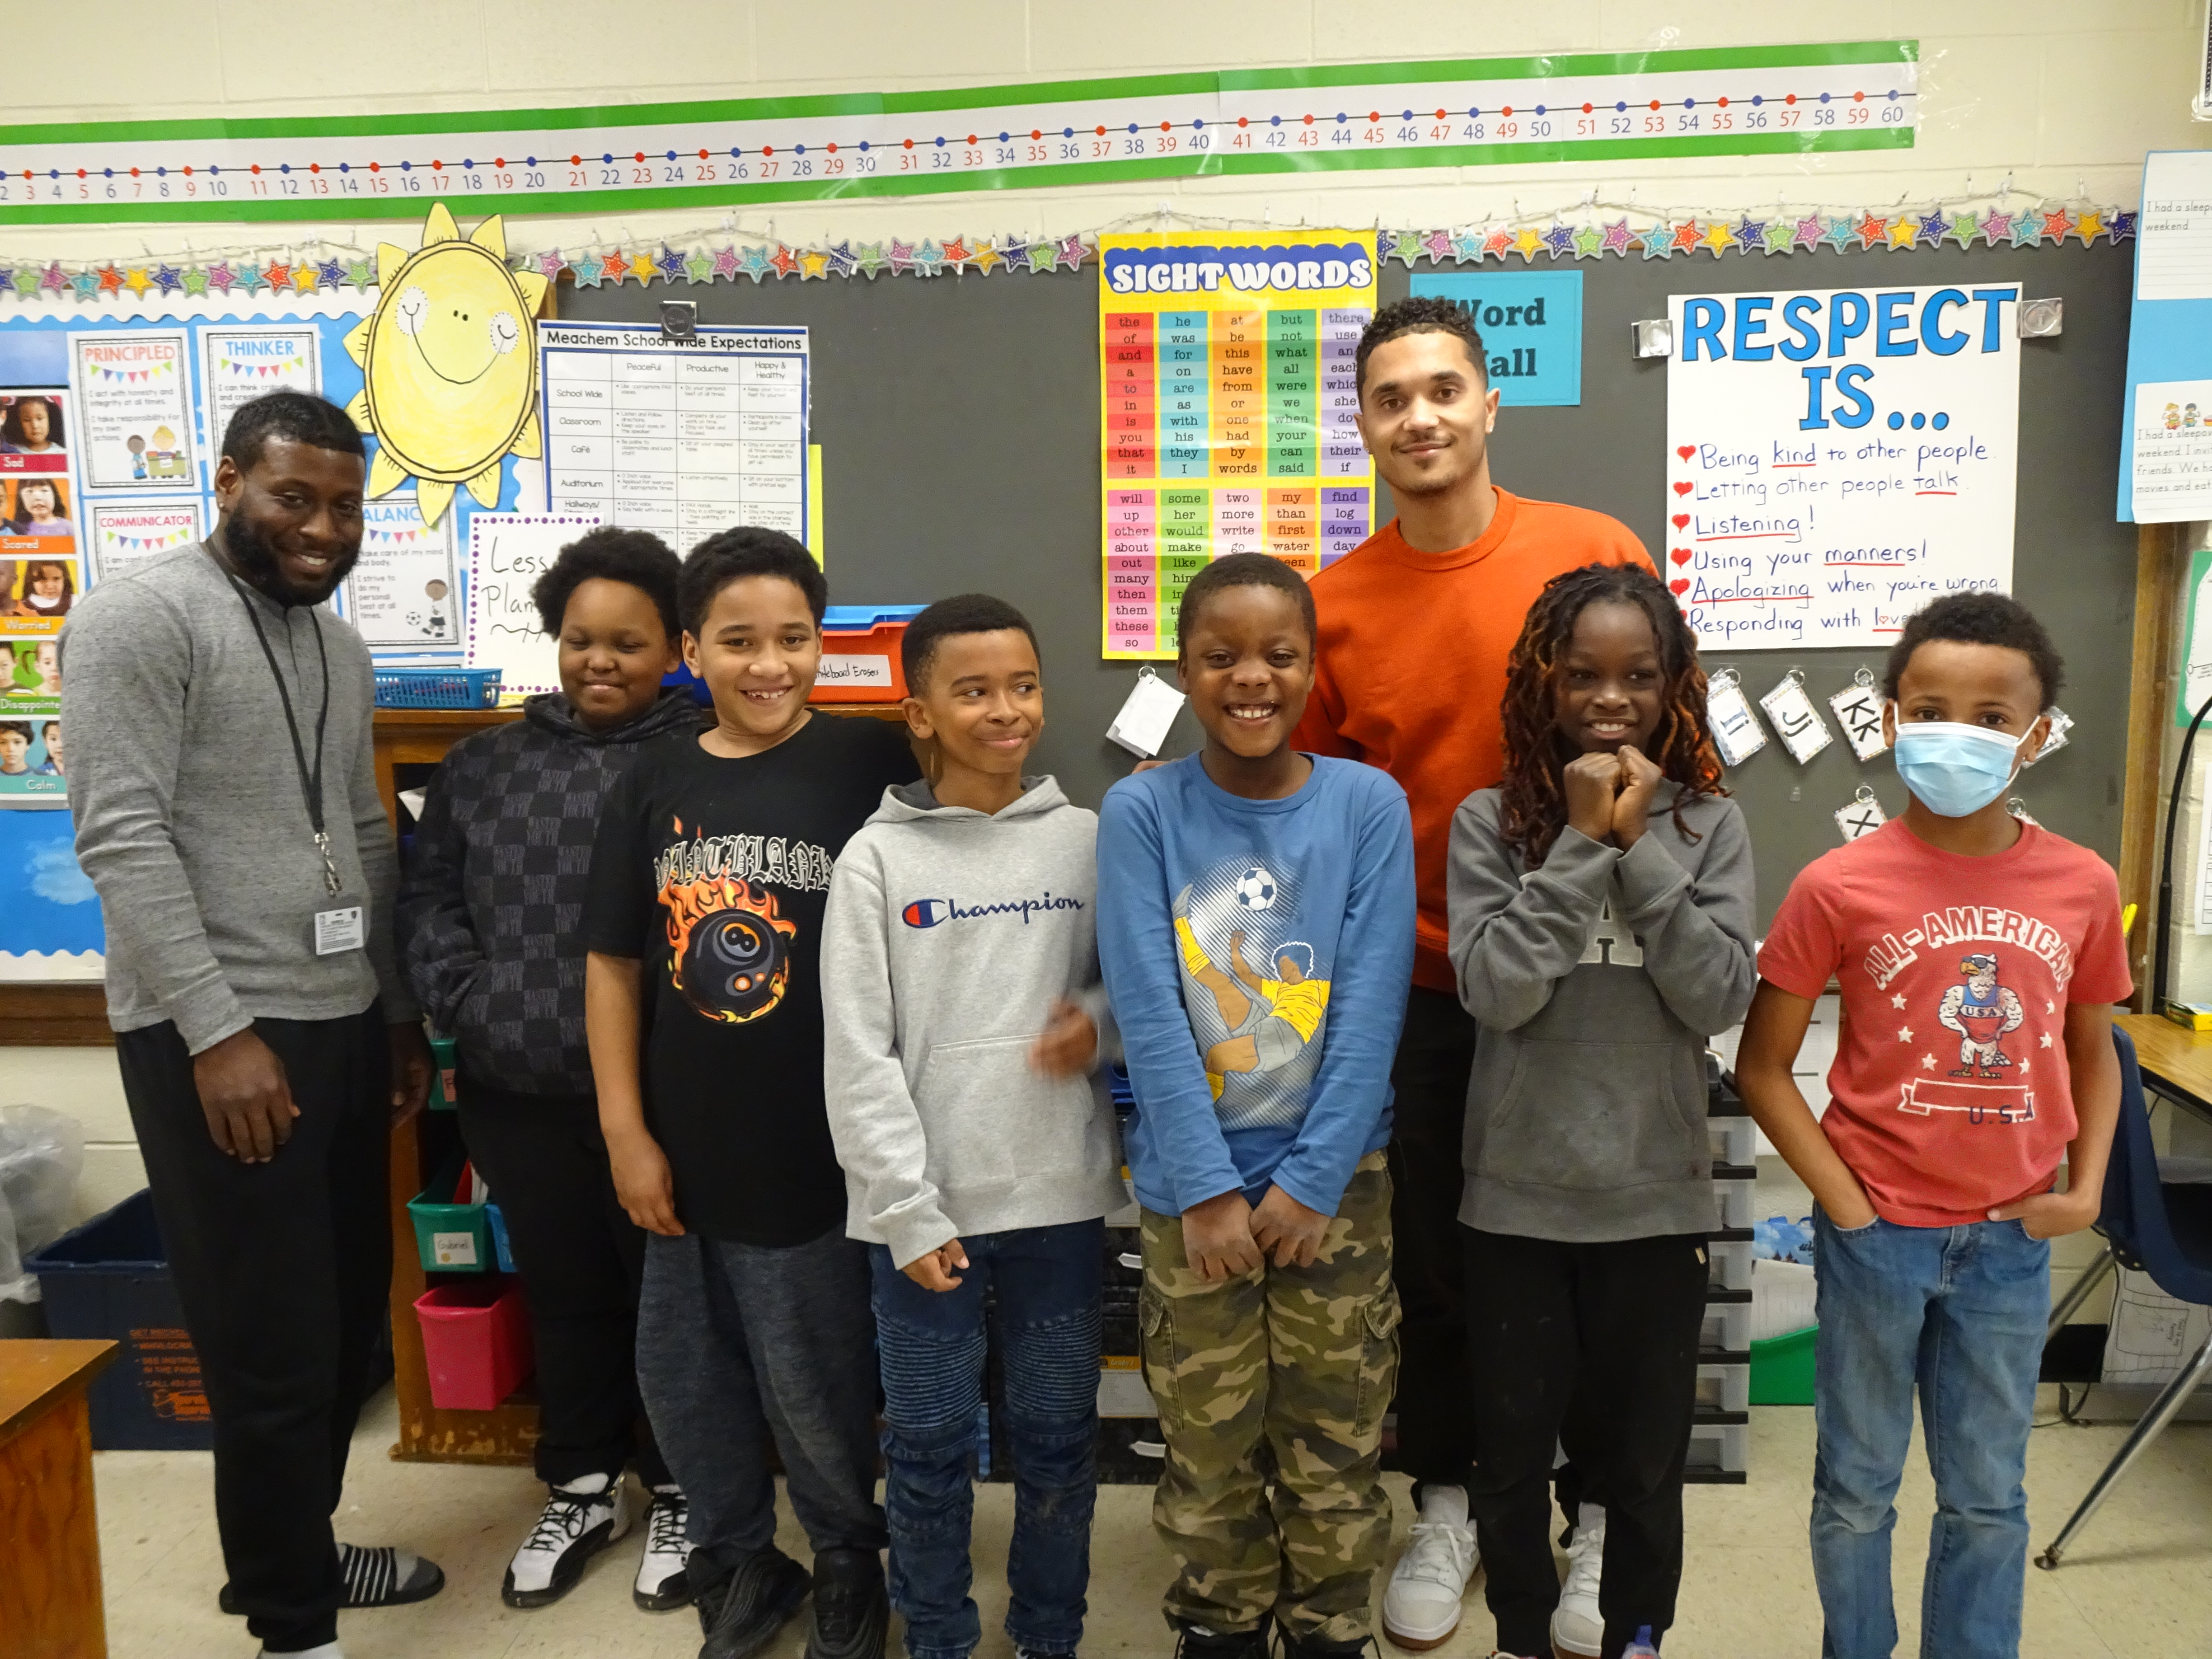 This is a photo of a group of Building Men students at Meachem Elementary, posing in a classroom with their two staff advisors.